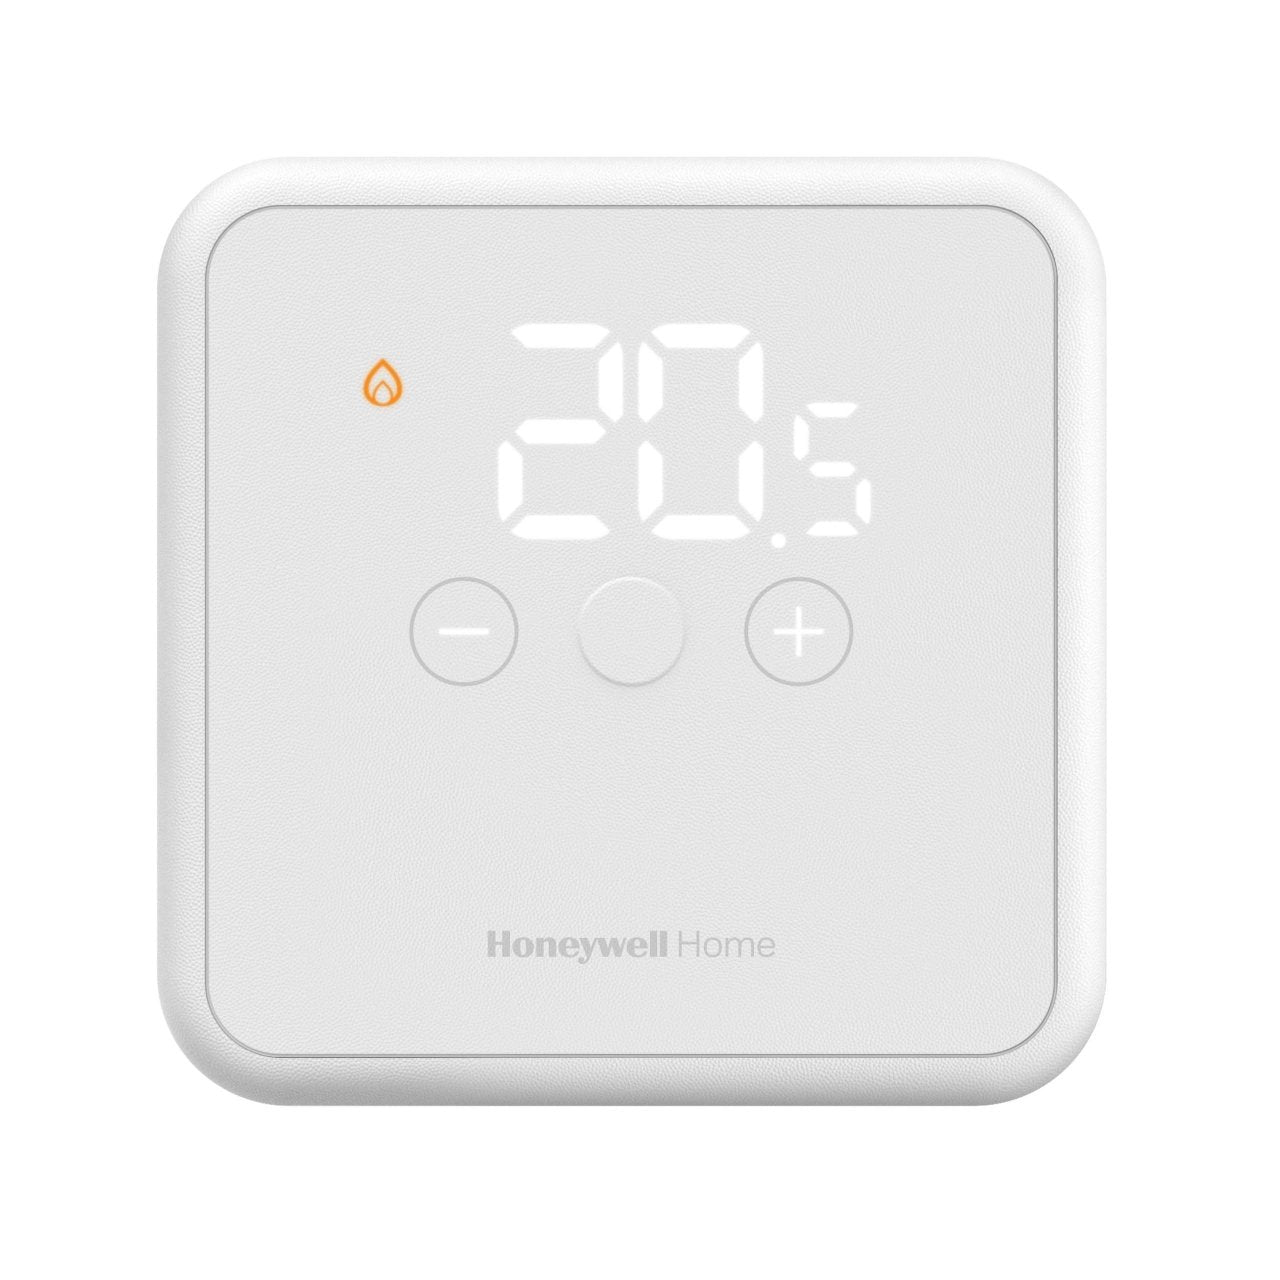 DT4M White Modulating Wired Room Thermostat DT41SPMWT30